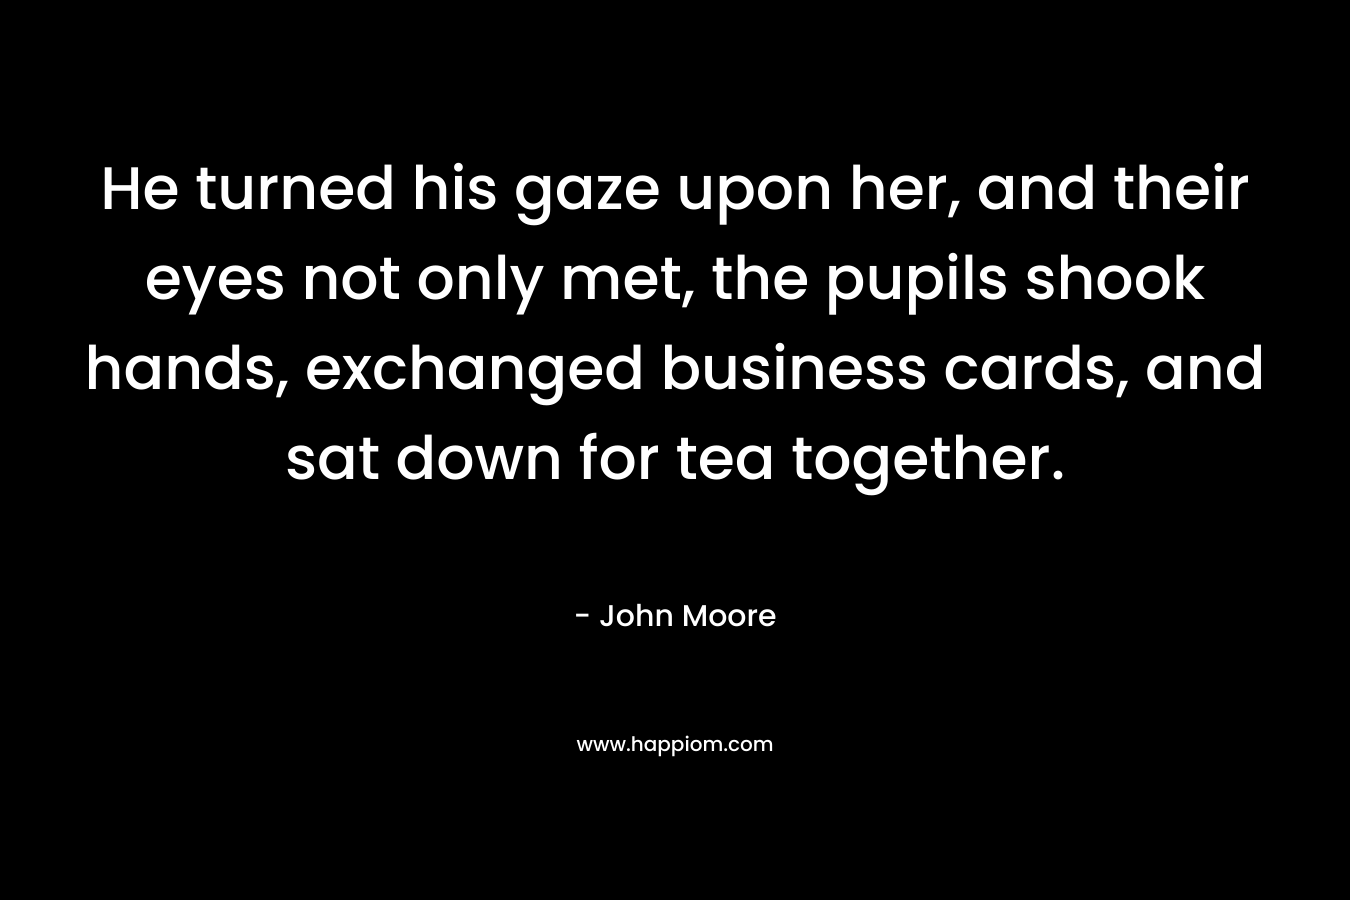 He turned his gaze upon her, and their eyes not only met, the pupils shook hands, exchanged business cards, and sat down for tea together. – John Moore